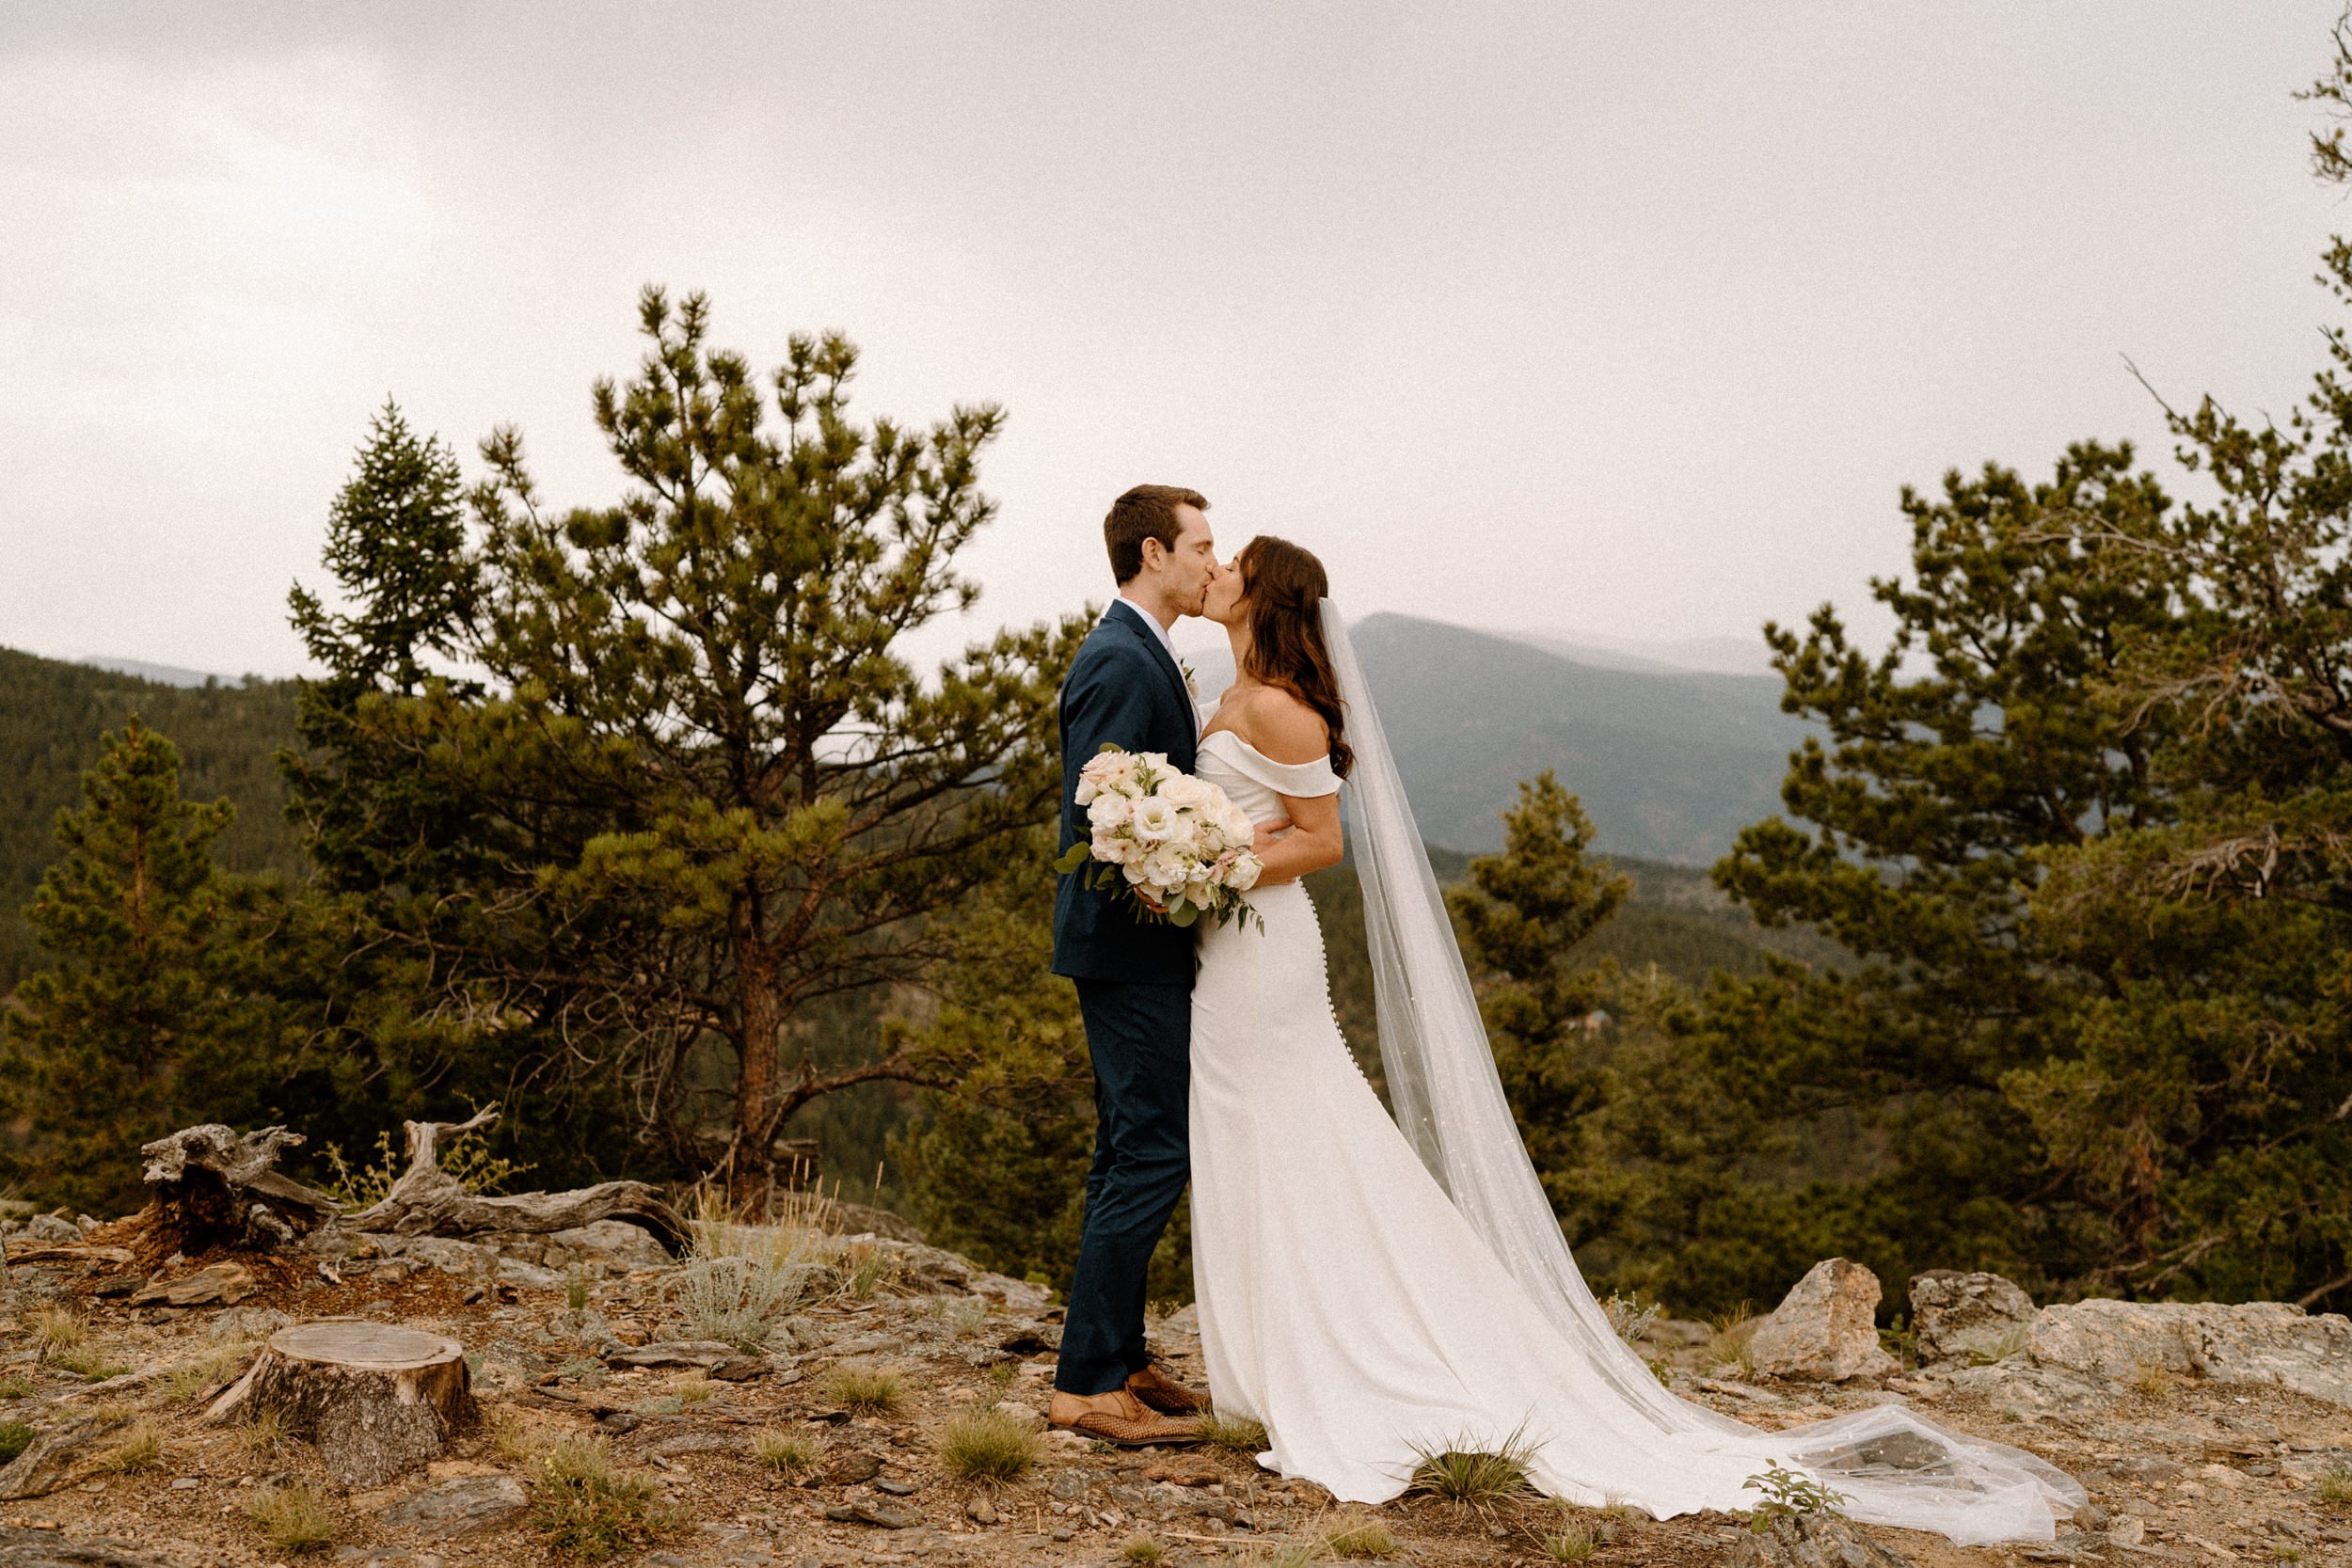 The bride and groom kiss on a mountain overlook at North Star Gatherings in Idaho Springs, CO